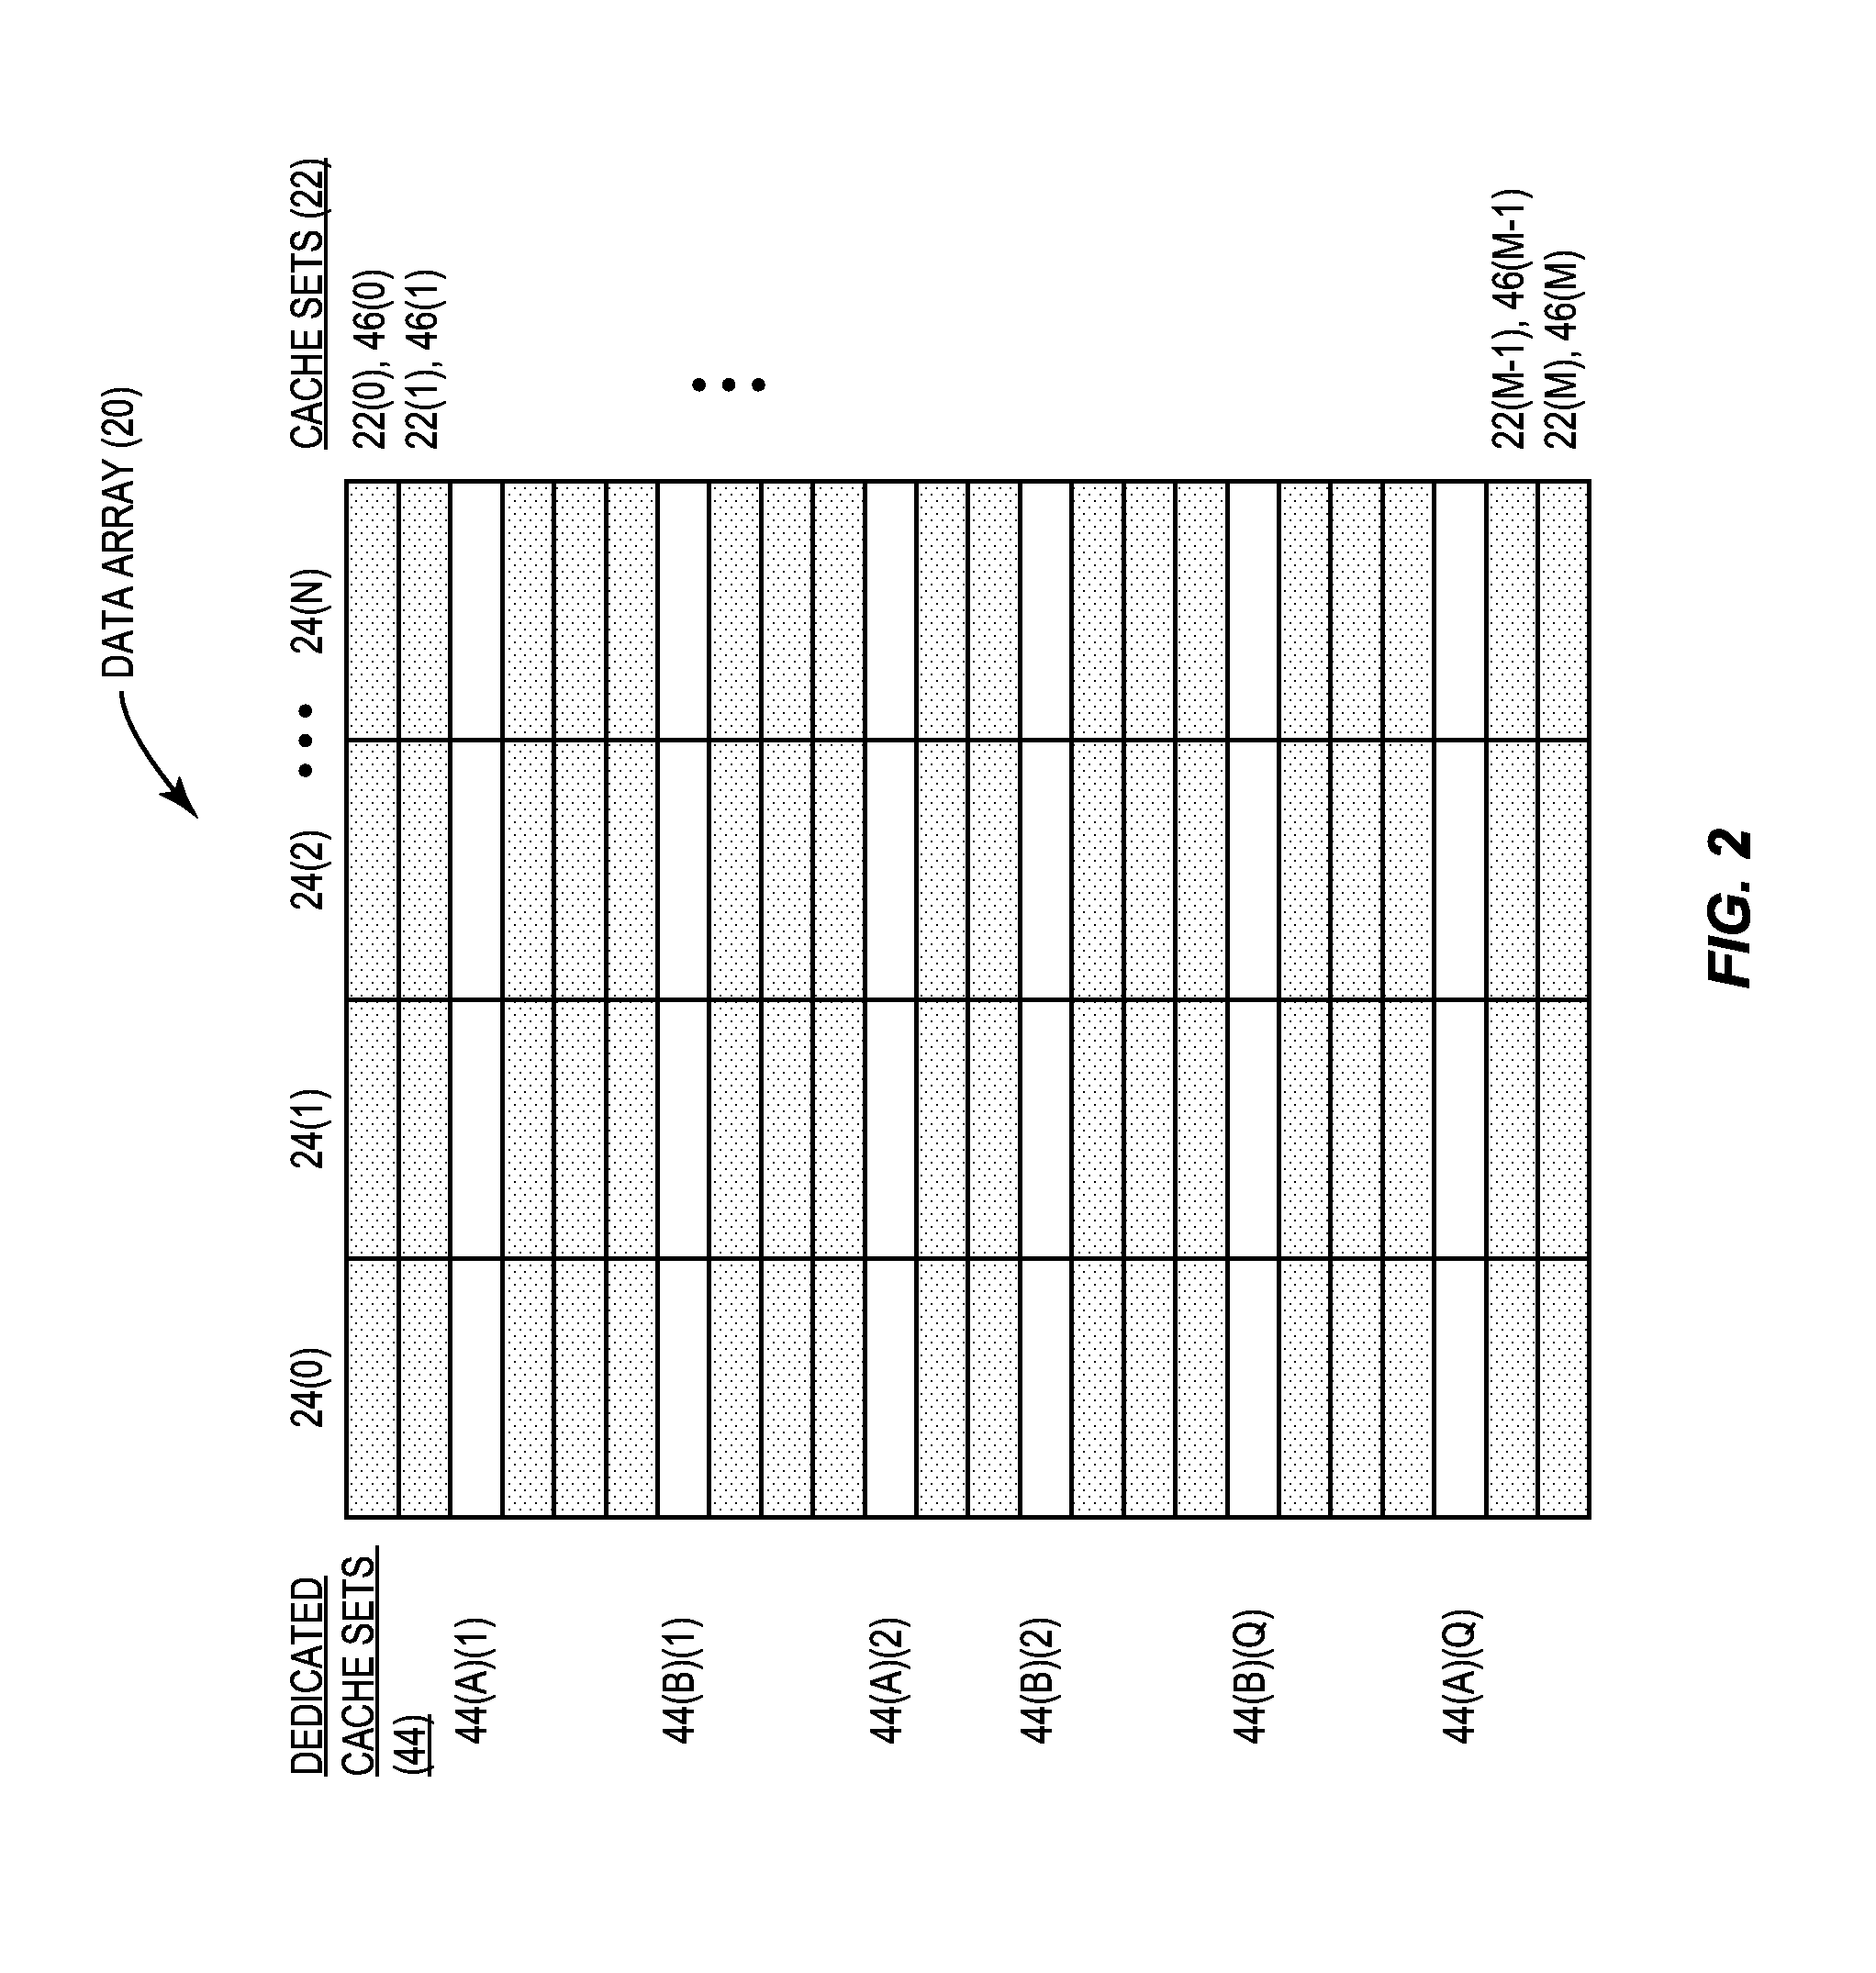 Adaptive cache prefetching based on competing dedicated prefetch policies in dedicated cache sets to reduce cache pollution